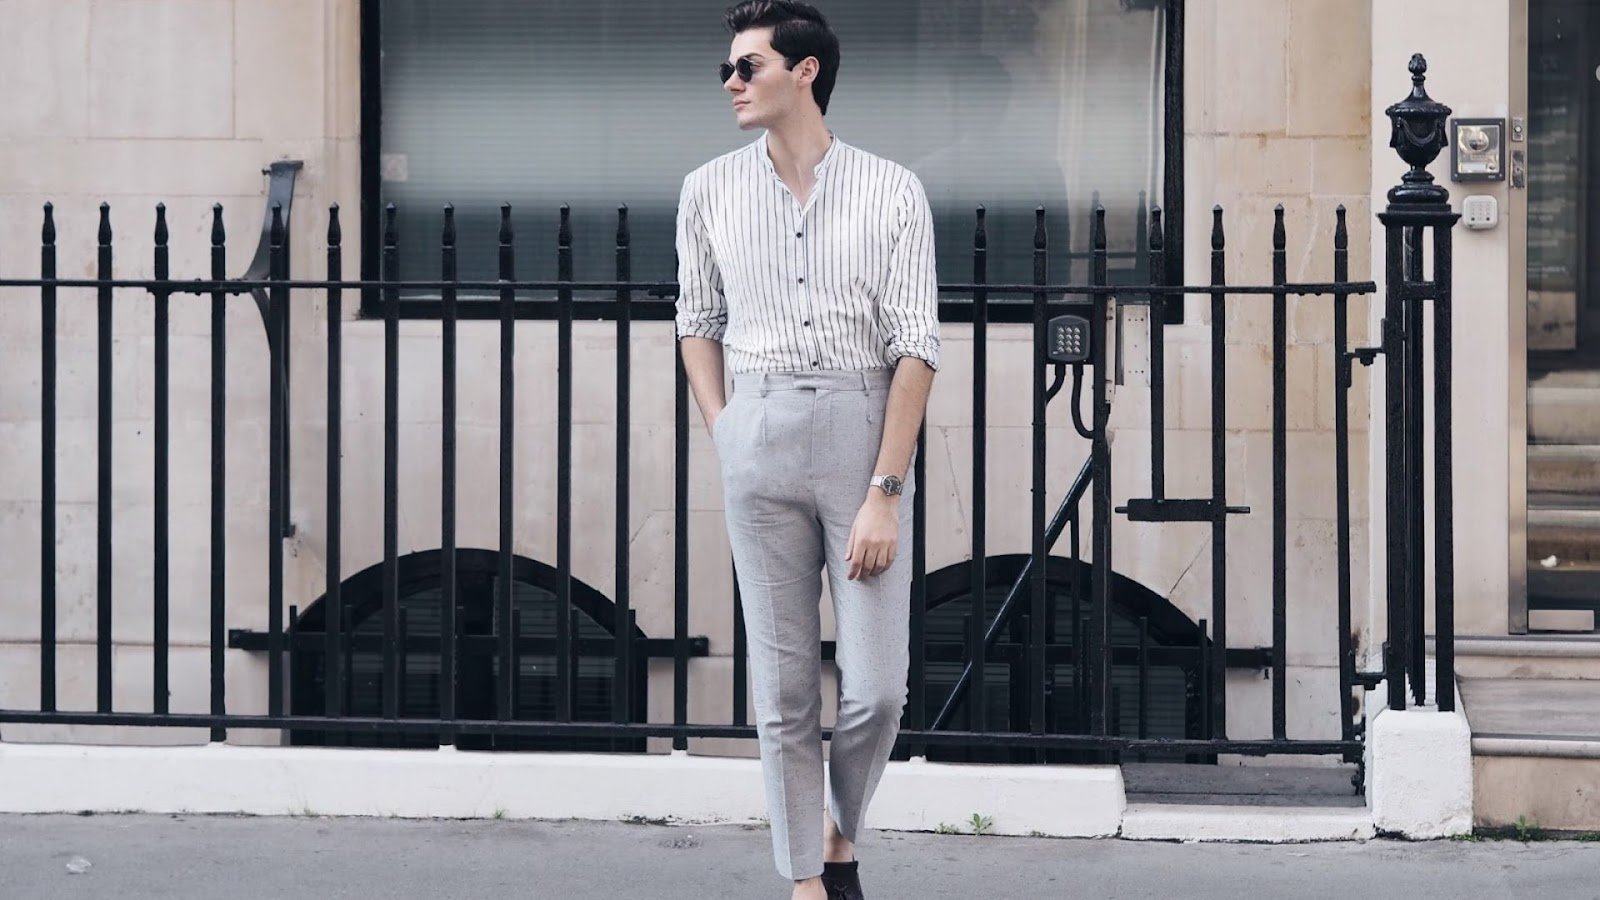 Effortless Gent: An Honest Approach to Personal Style